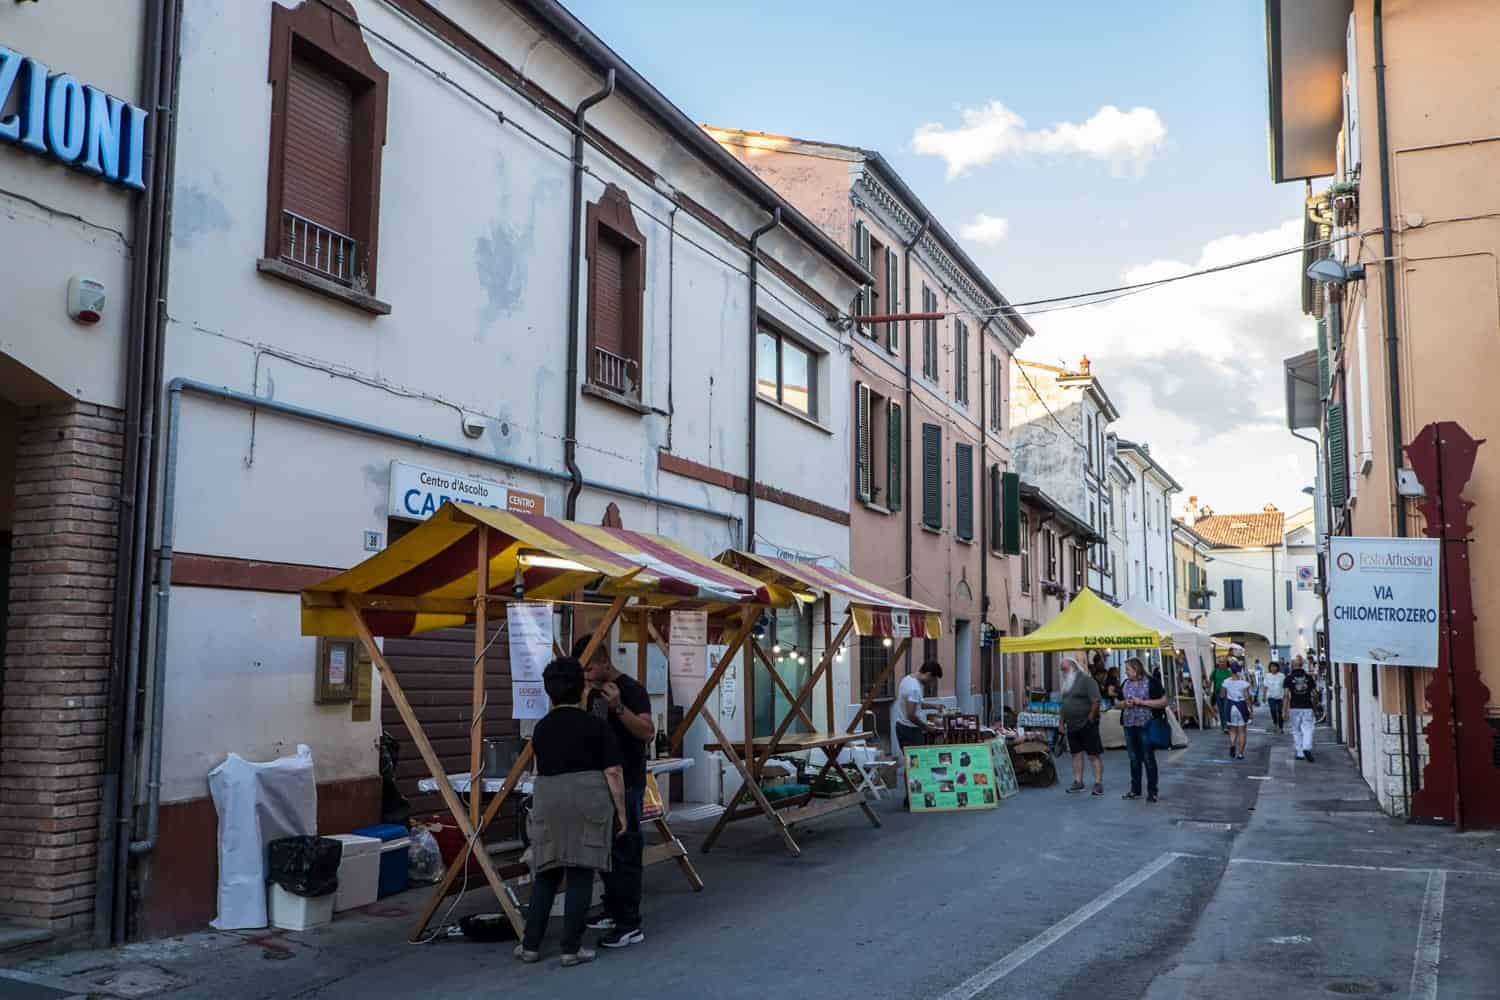 Even small streets in Forlimpopoli, Italy get busy during Festa Artusiana 